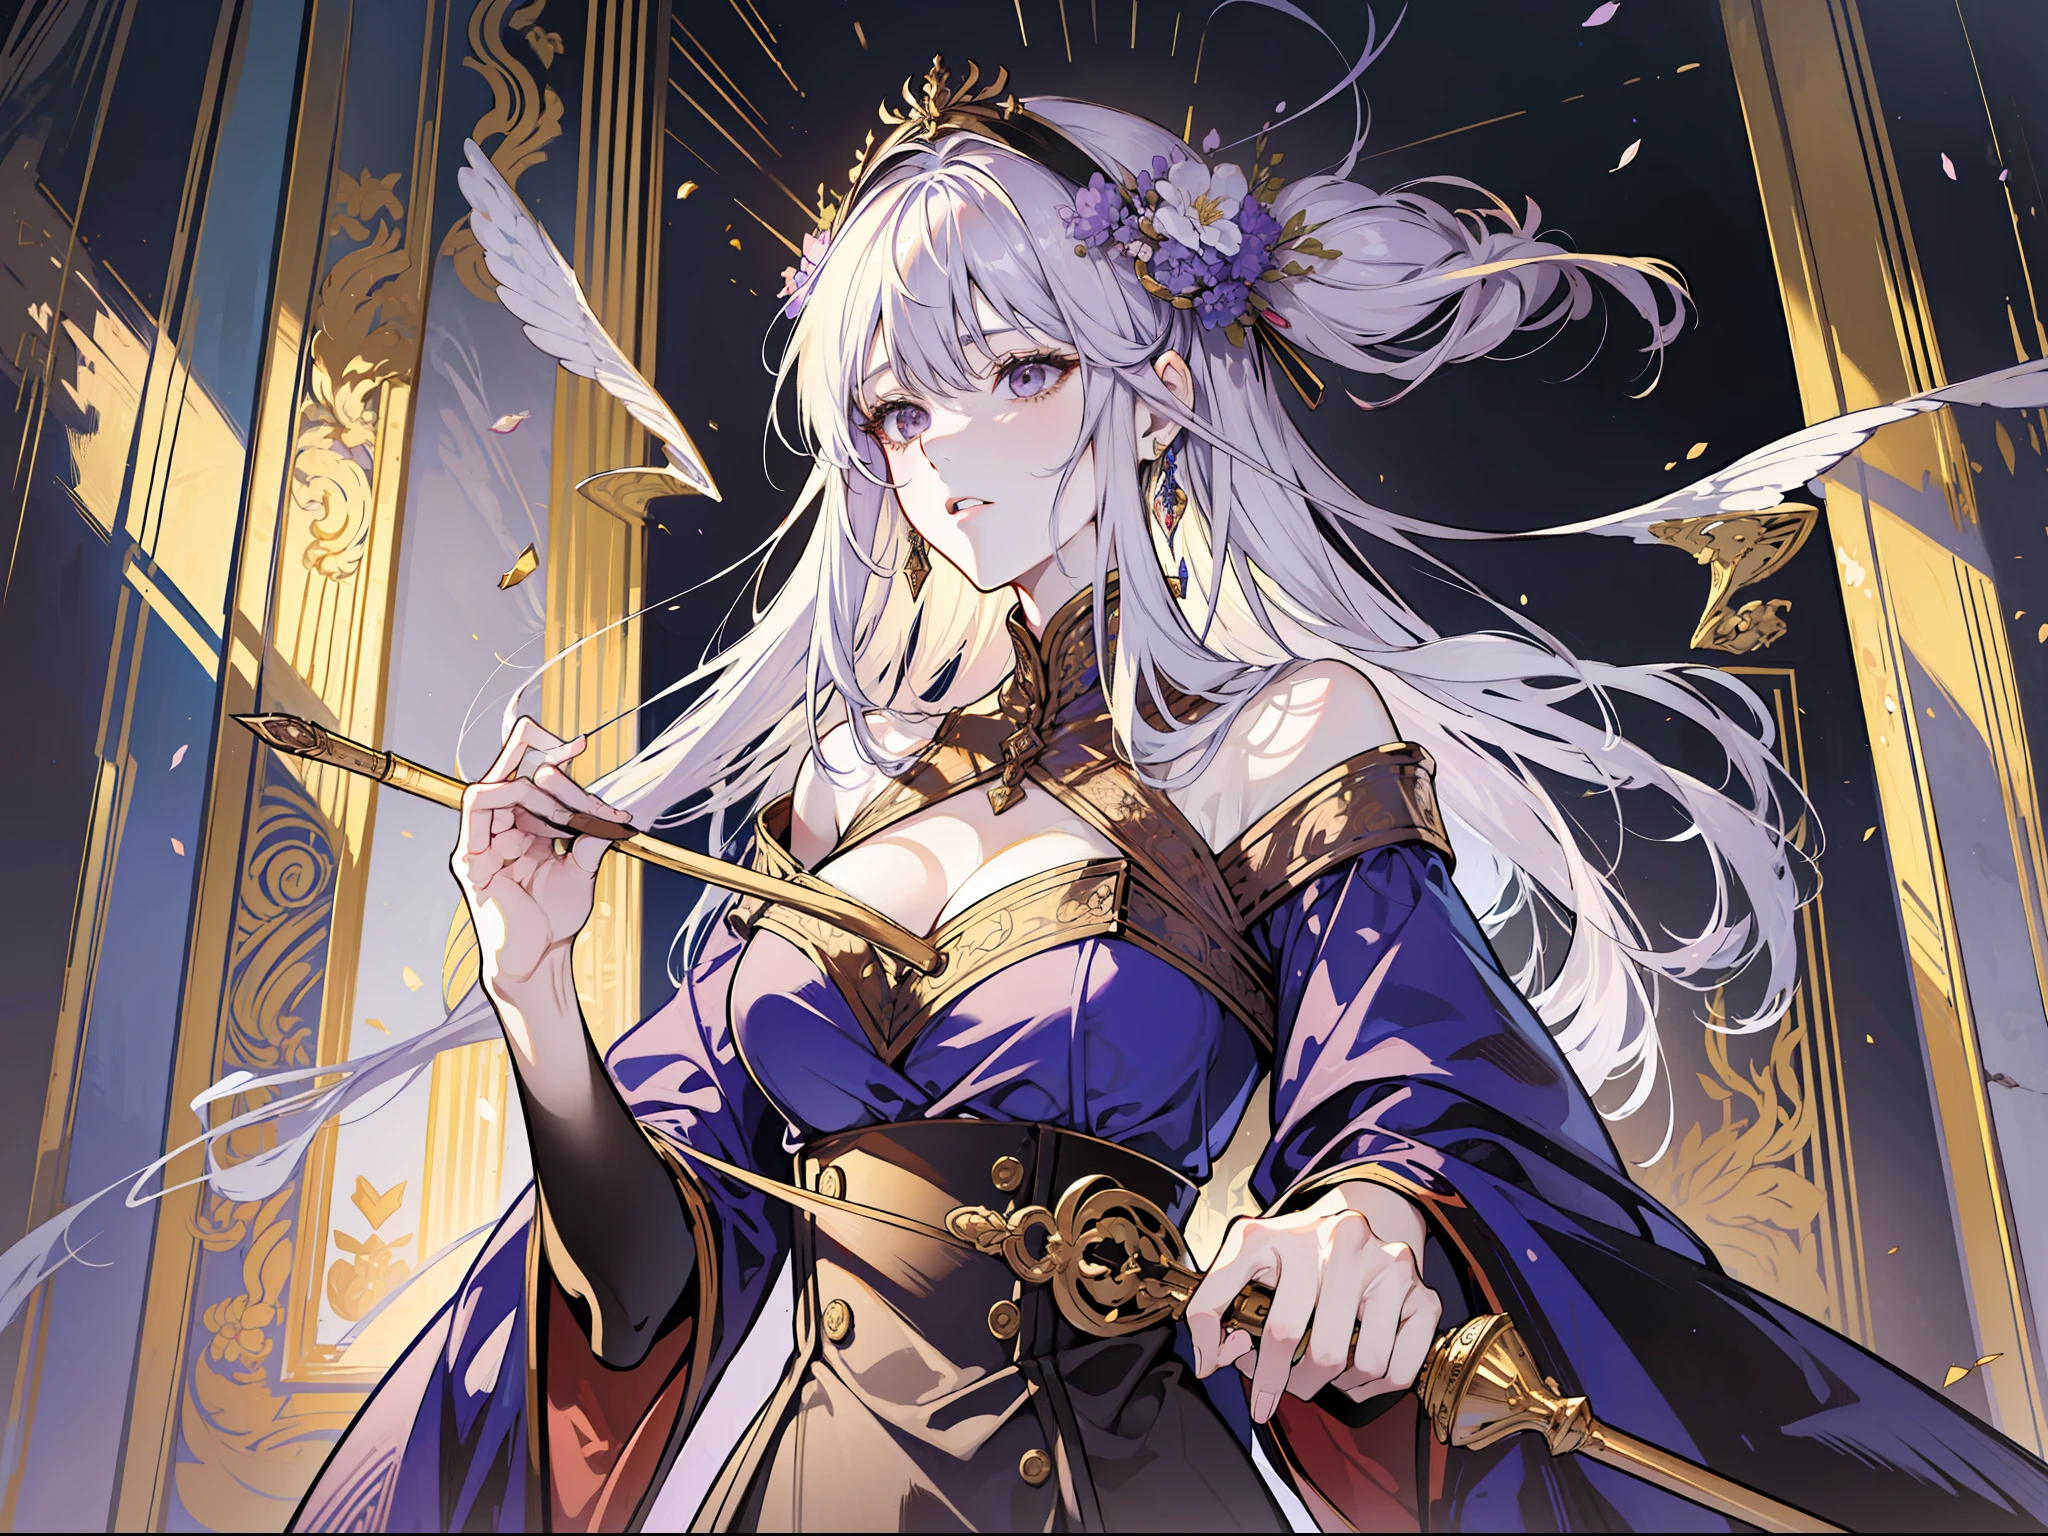 (absurd, high resolution), (panorama), ccurate, anime, high detail, a woman, mature, beautiful, tall, queen's attire, lilac complex dressed, exquisite, brown eyes, pale blonde hair, silver crown on the head, irritated, serious, in the palace, magical, antique style, holding a very long golden delicate wand, vista